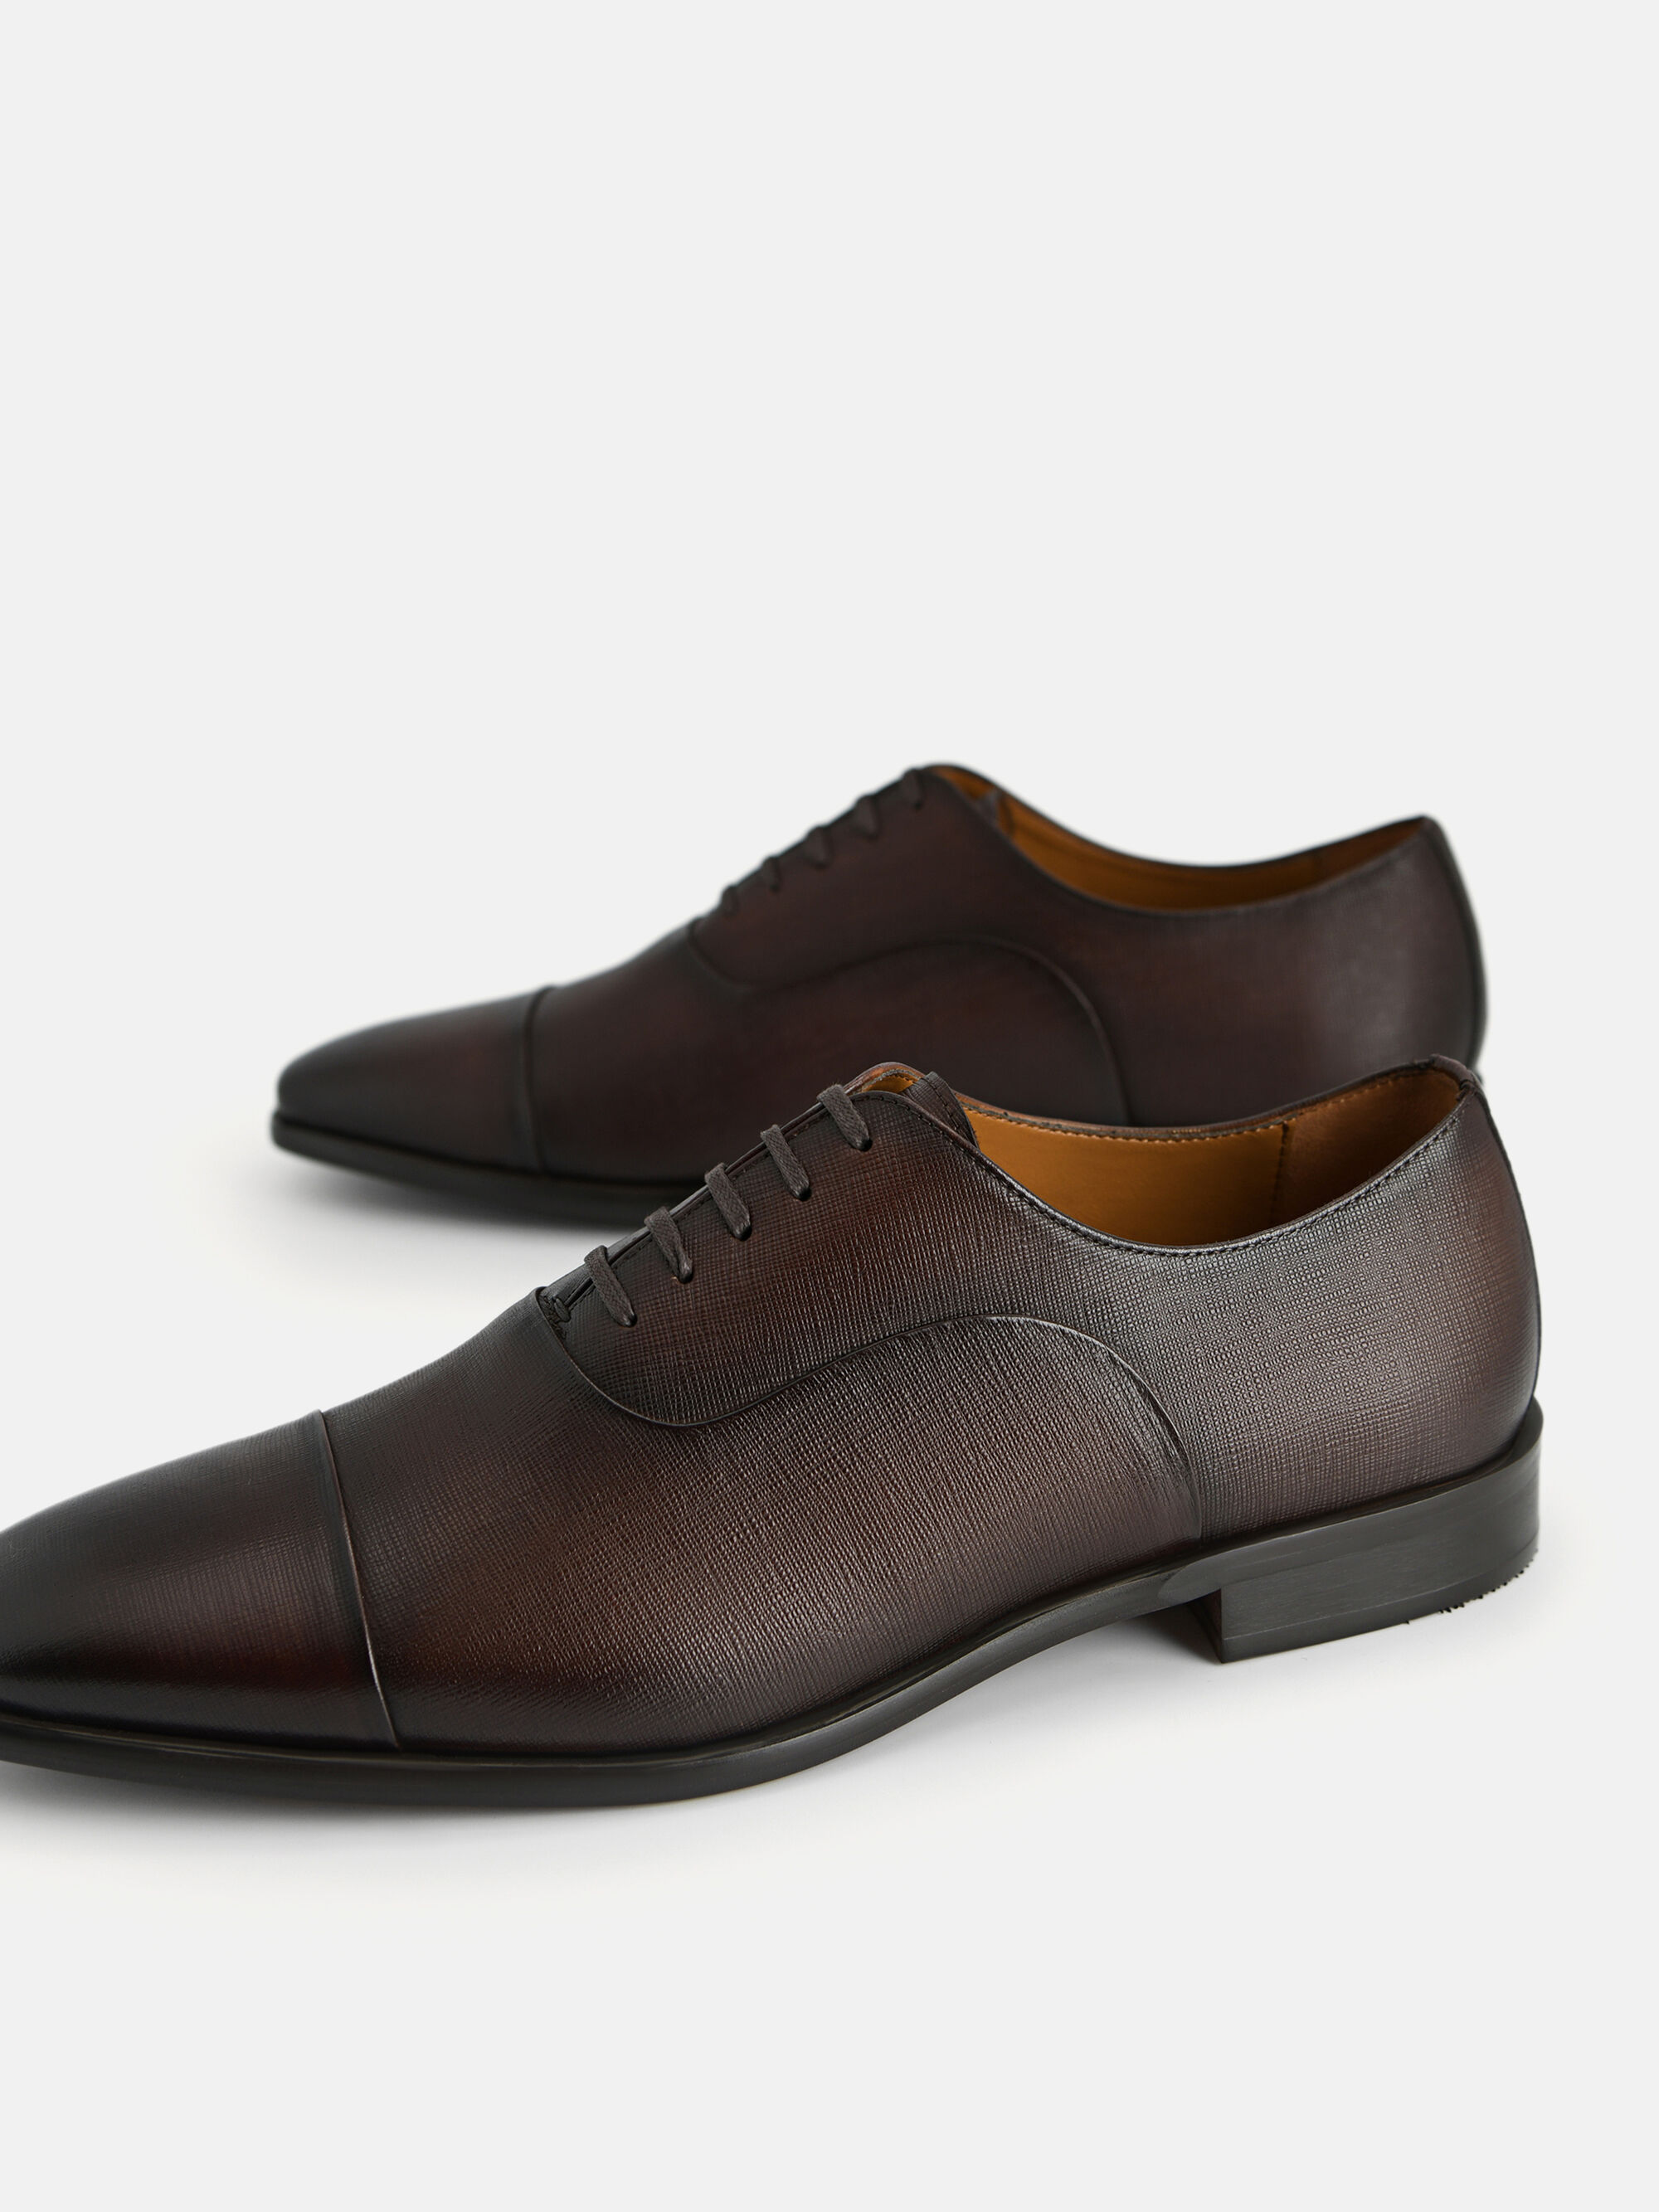 Textured Leather Oxford Shoes, Brown